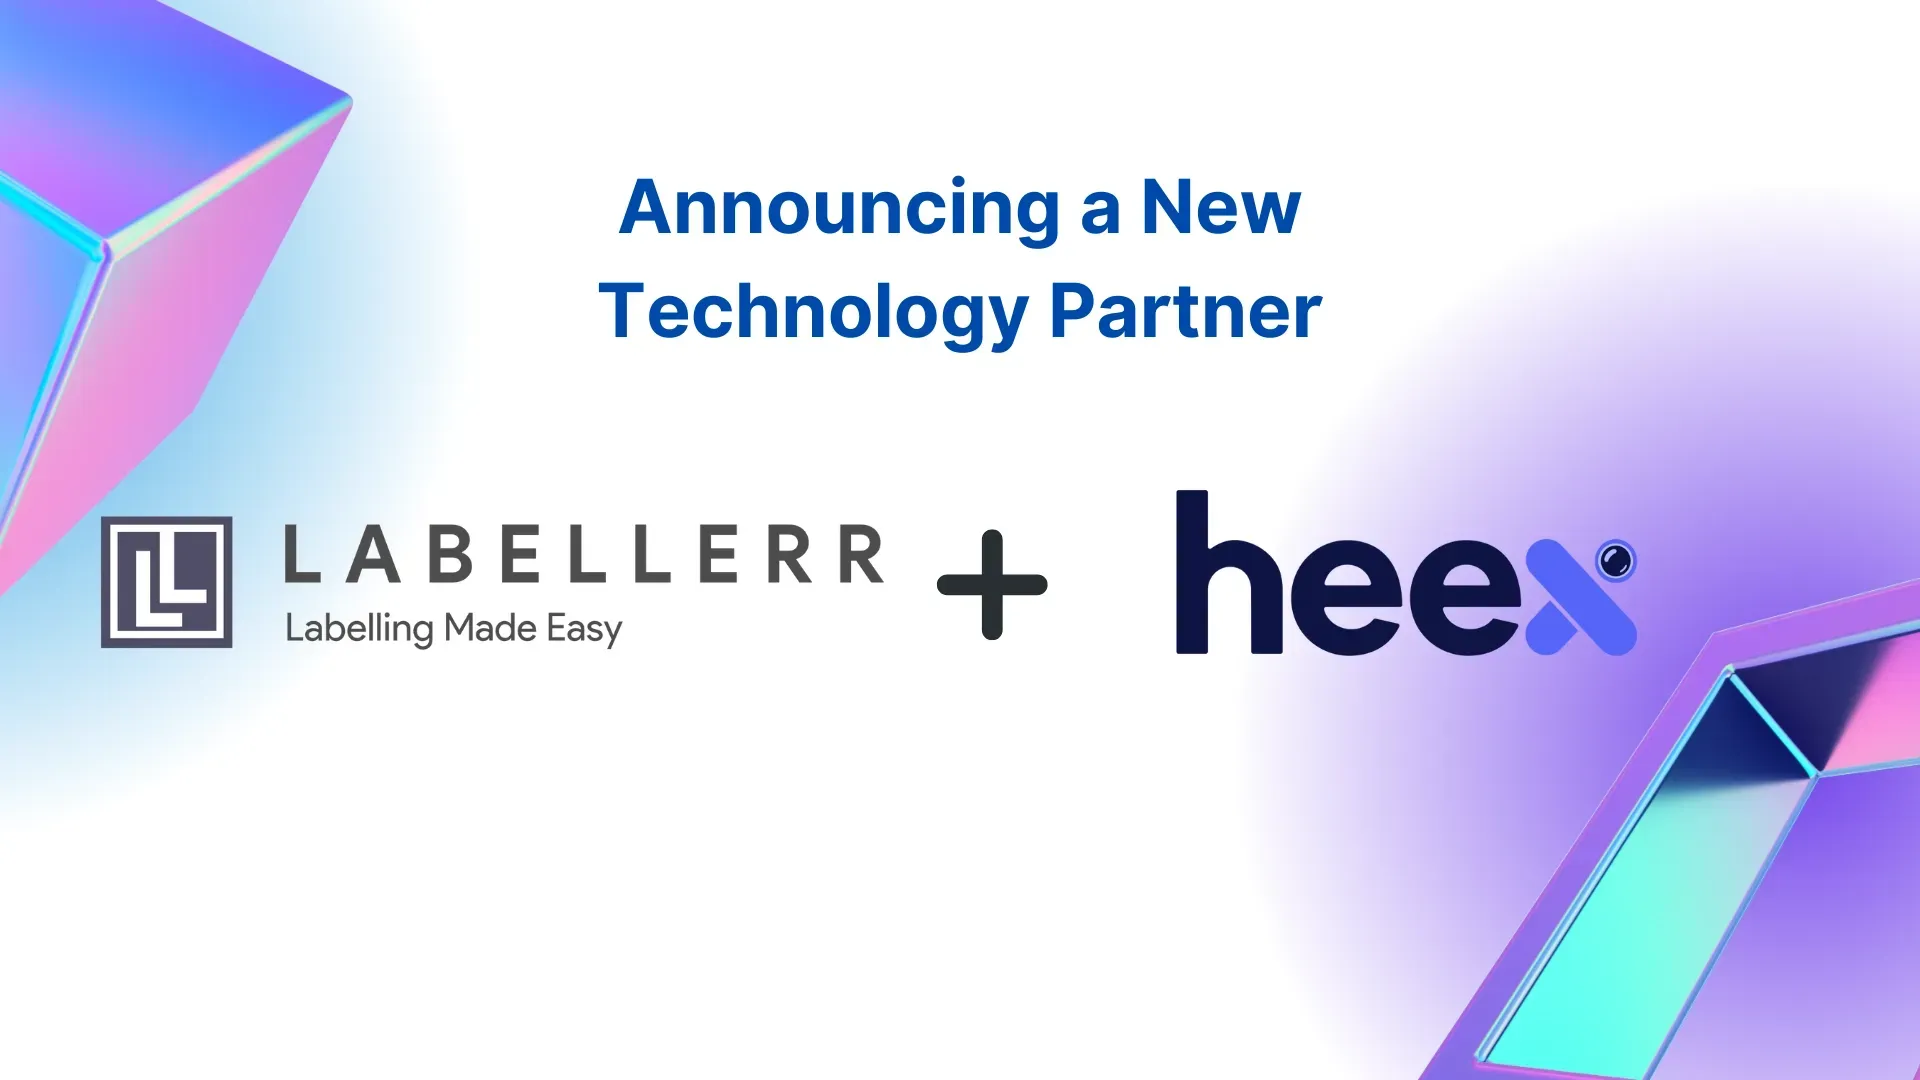 Labellerr and Heex join hands to build platform 